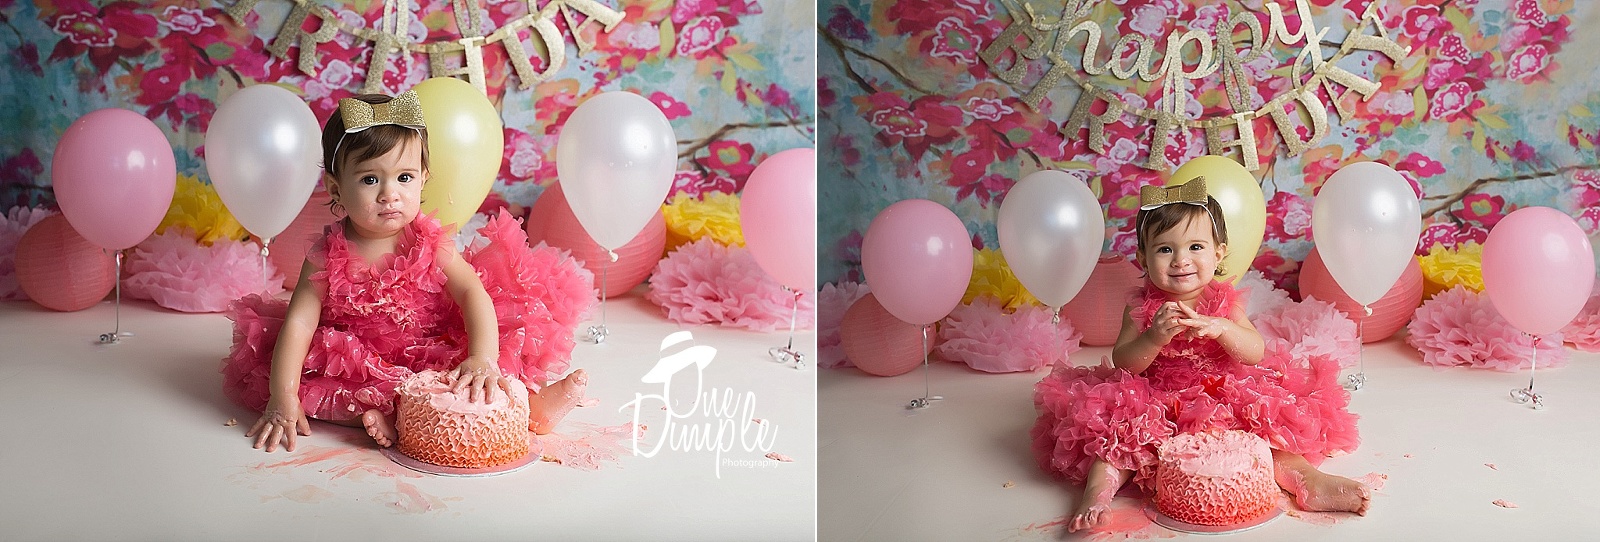 Cake smash session with balloons and floral backdrop